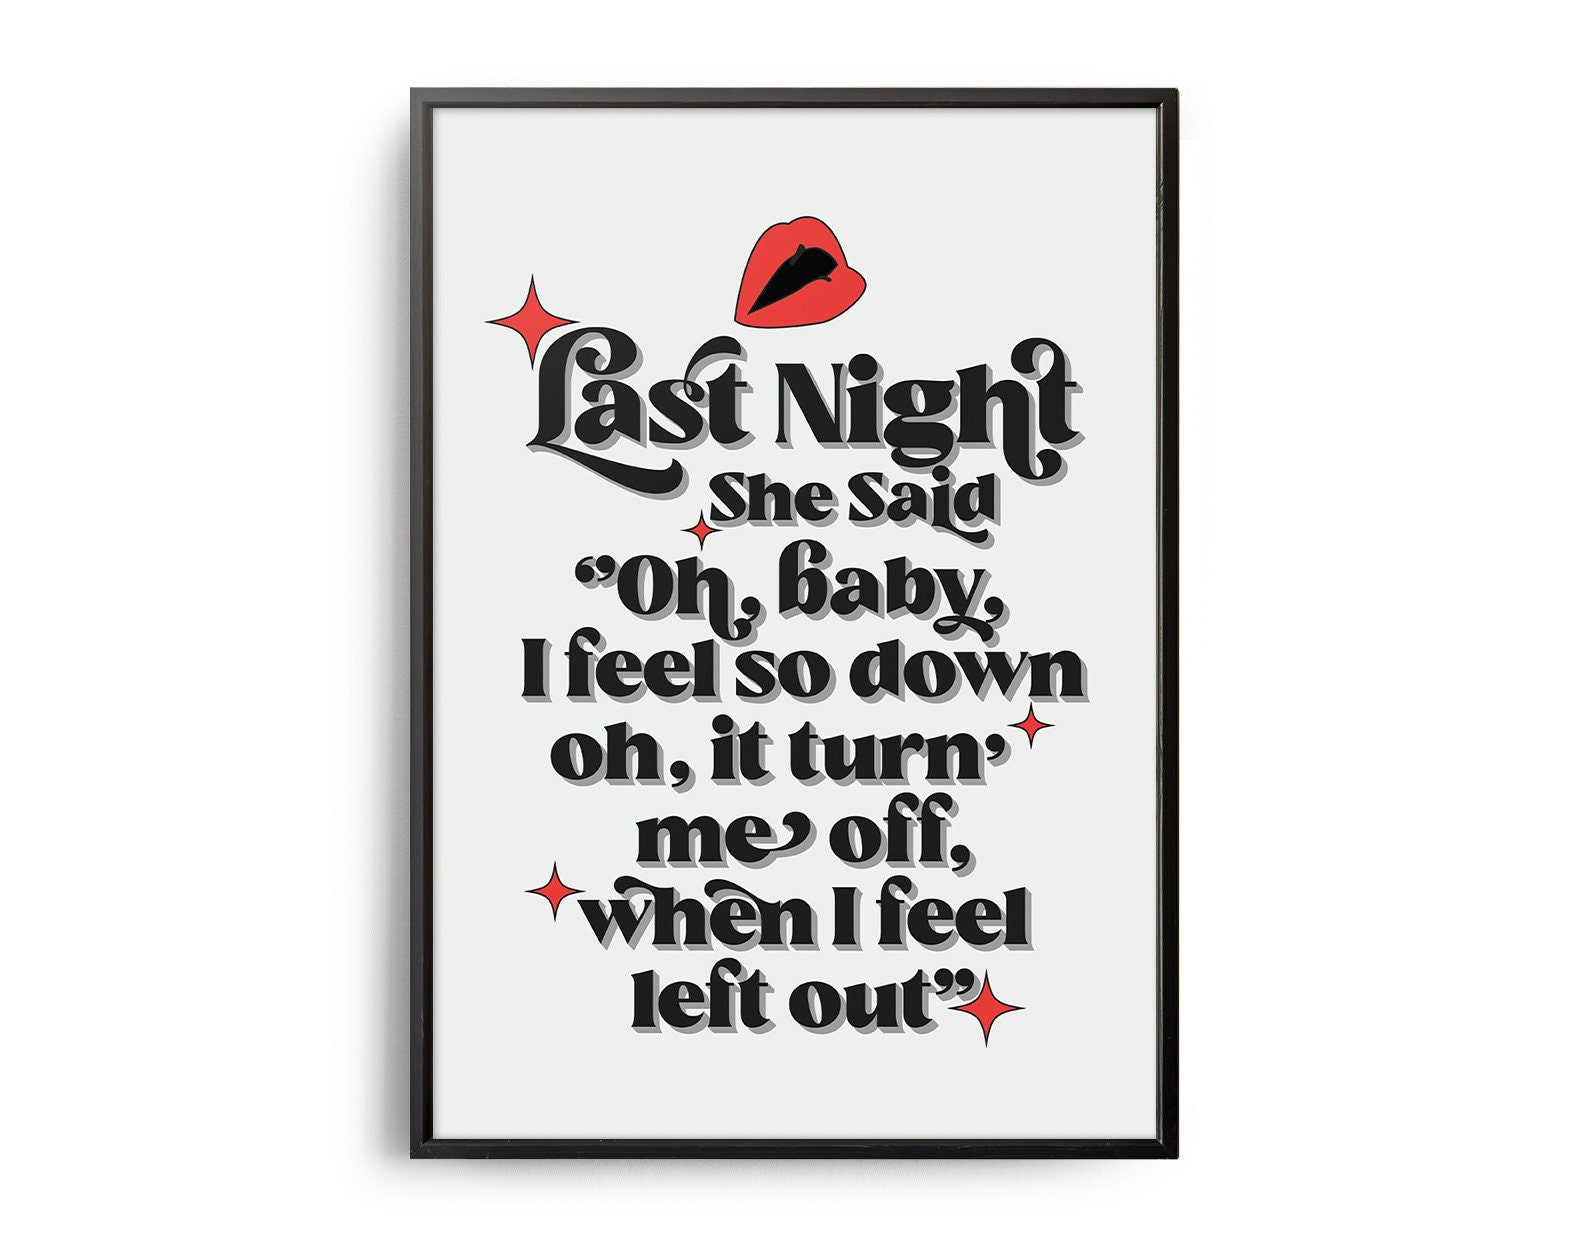 The Strokes You Only Live Once Vinyl Record Song Lyric Quote Music Print -  Song Lyric Designs